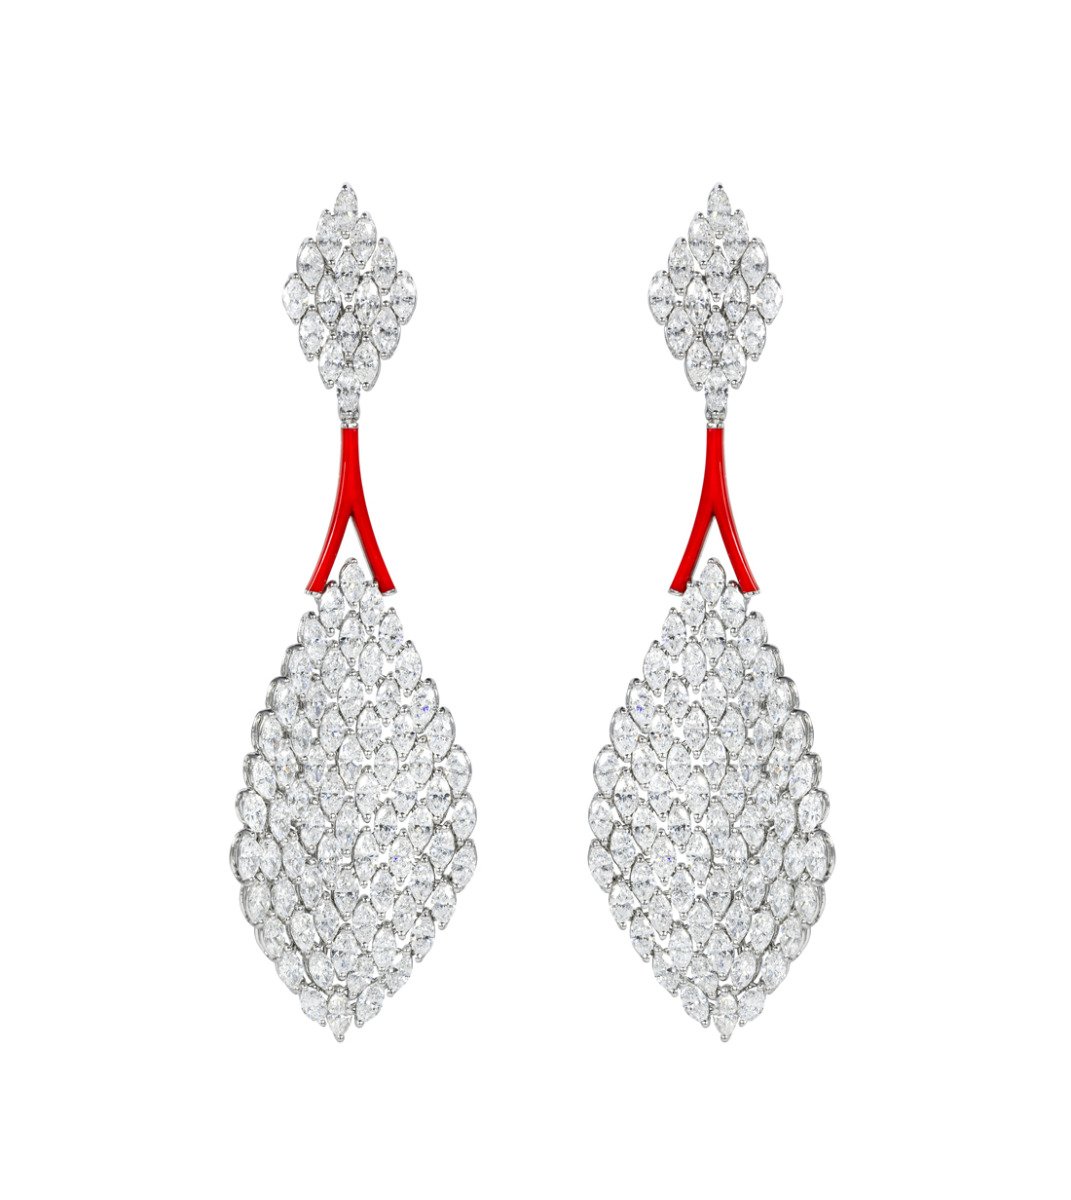 Etho Maria “Diamonds in Color” Marquise Diamond Drop Earrings in Red Ceramic and 18kt White Gold